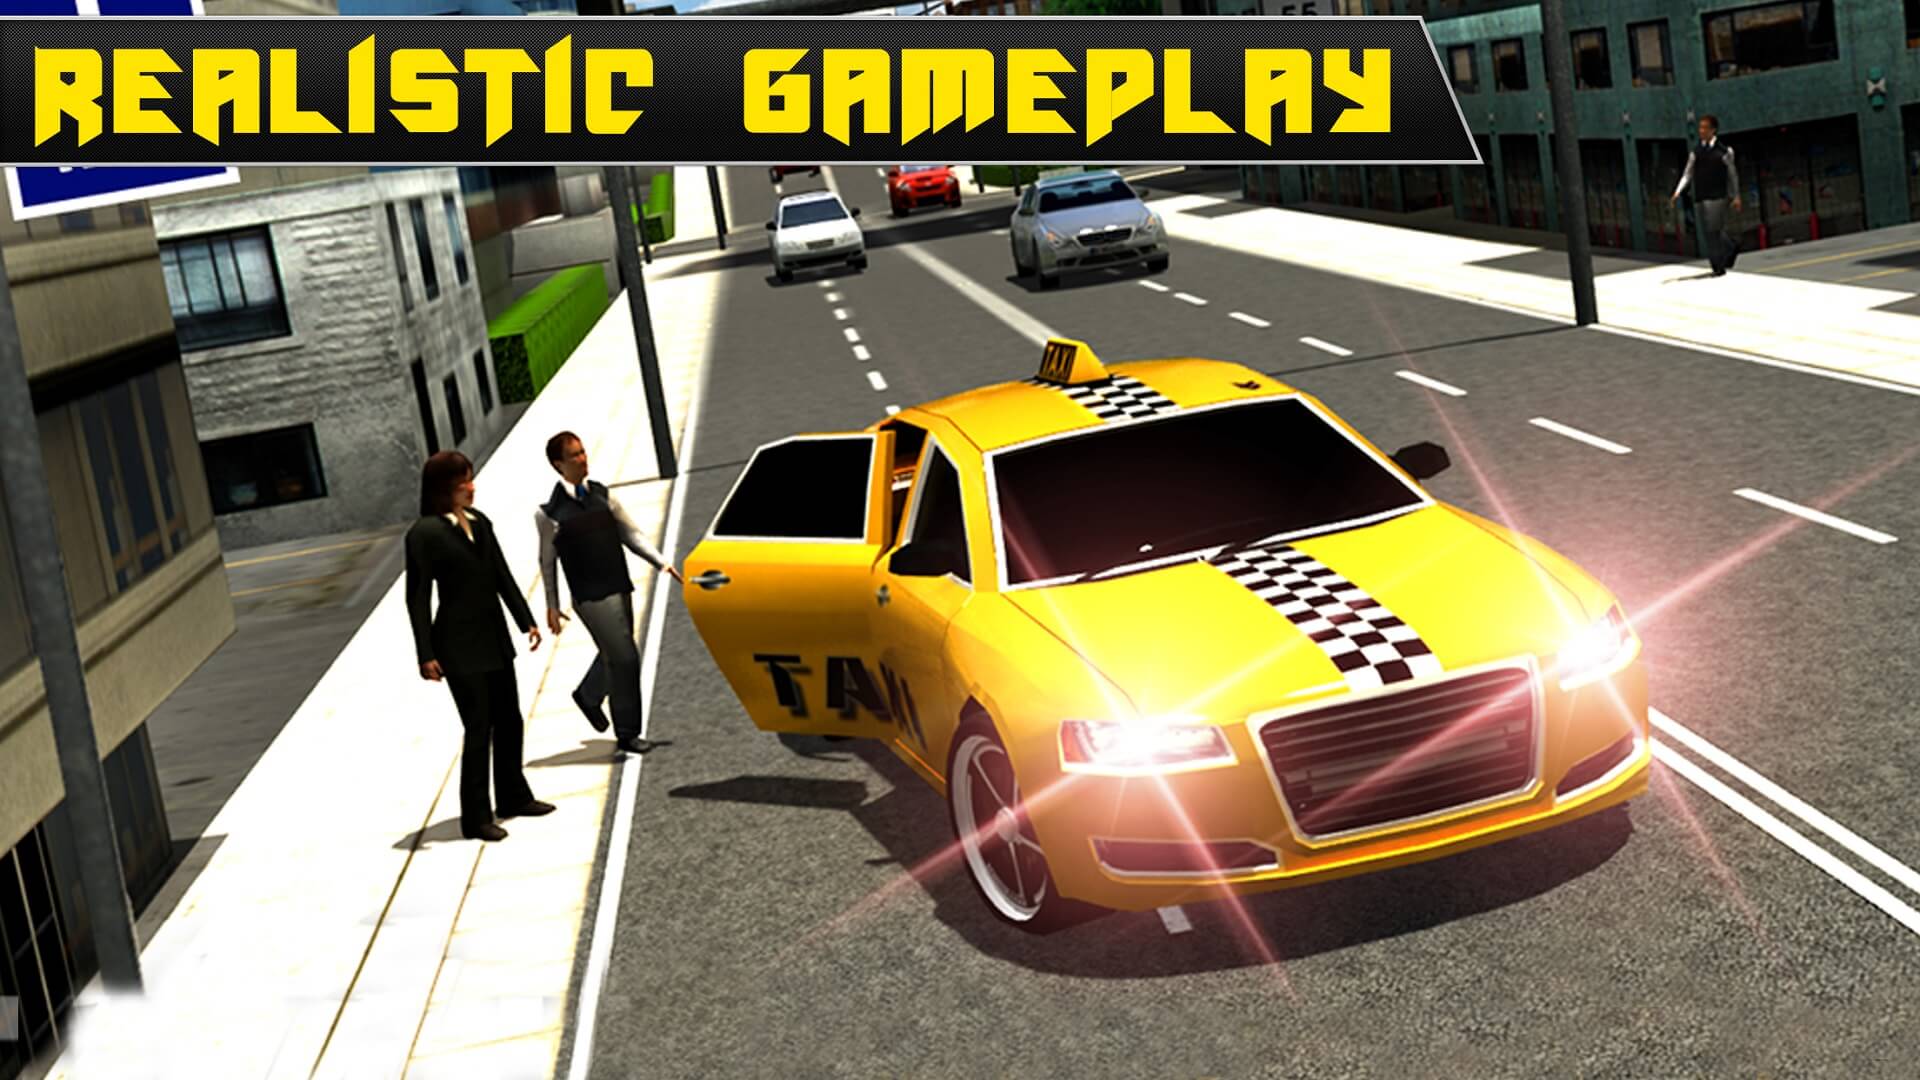 Crazy Taxi Simulator Cab Sim Modern Taxi Game 64 Bit Source Code Source Code SellAnyCode